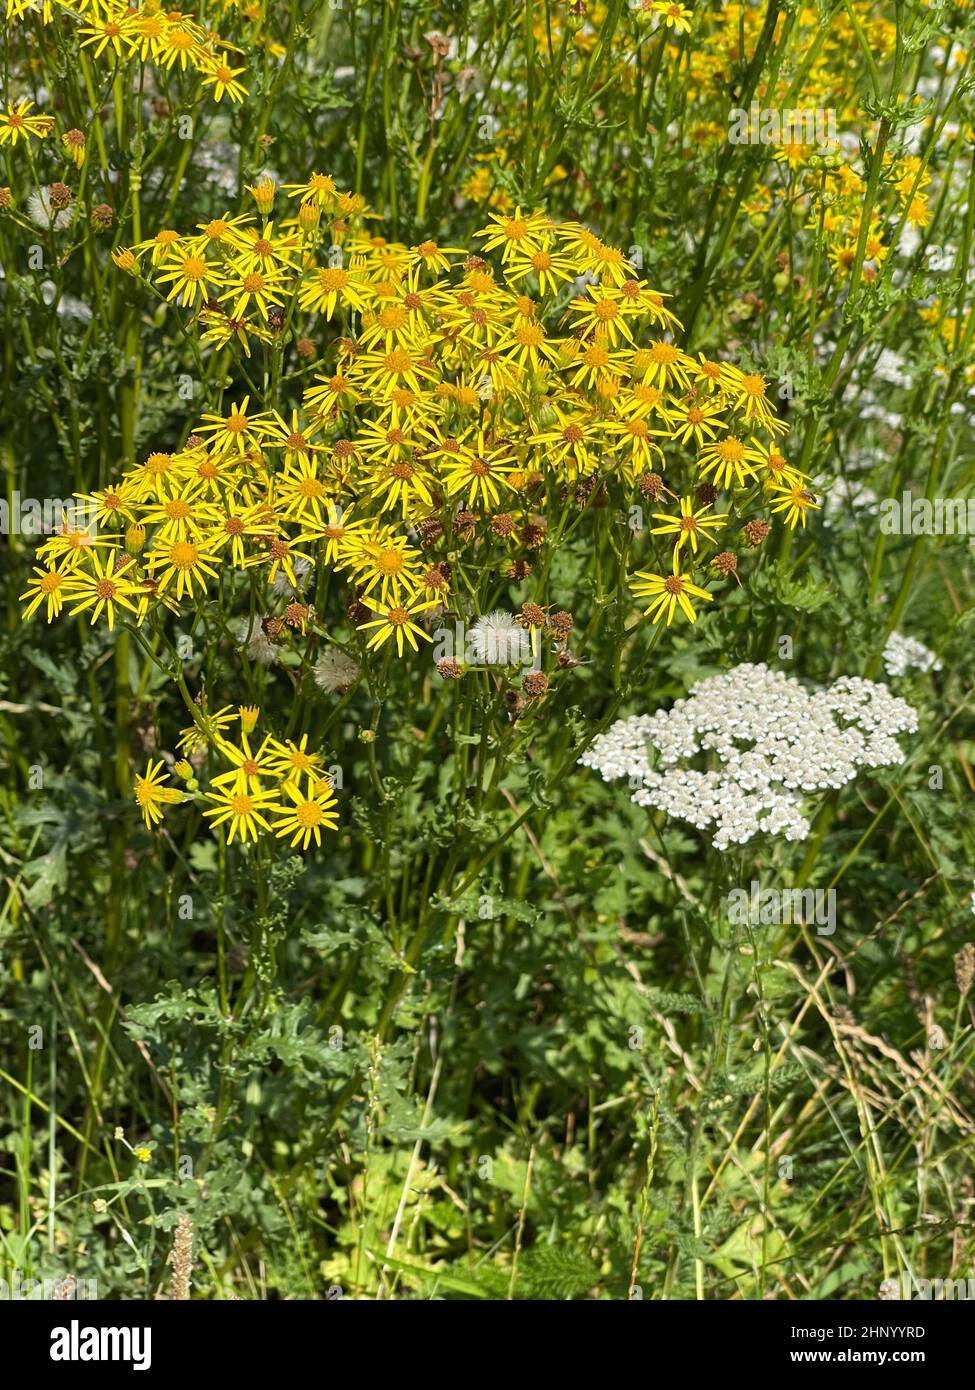 Jacobs ragwort, Senecio jacobeae, is a weed and a poisonous plant and very poisonous especially for grazing animals. Stock Photo